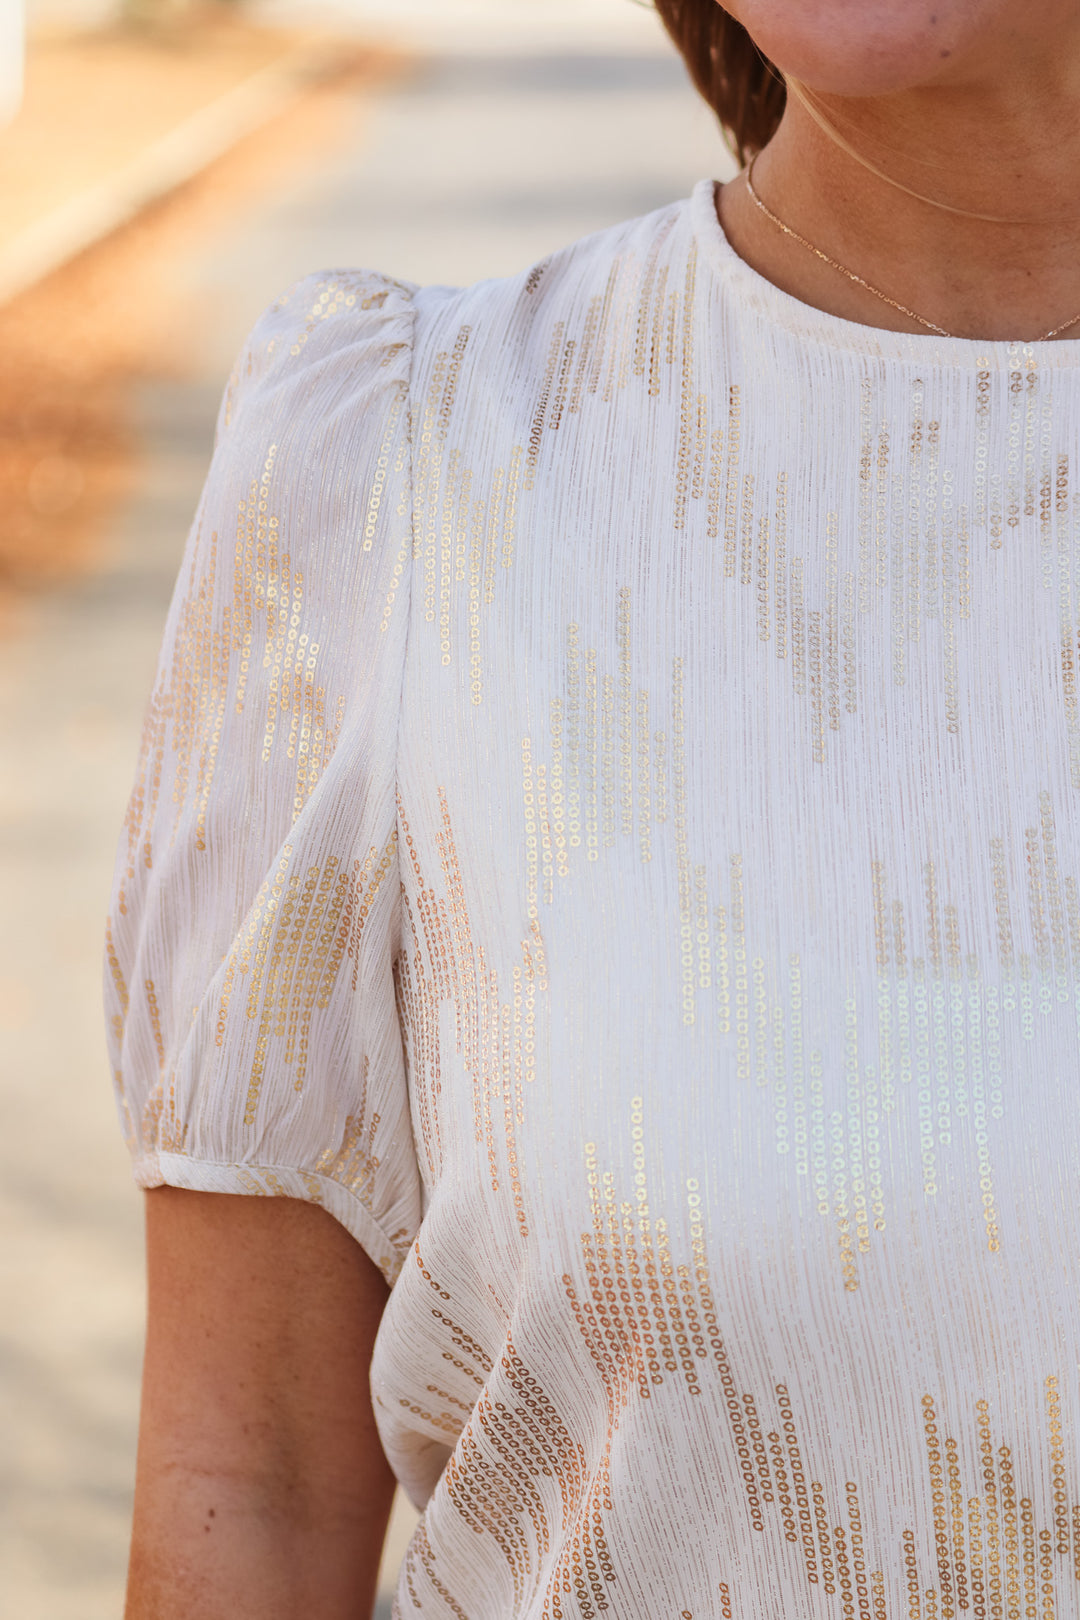 Sequin Pattern Top - Ivory/Gold